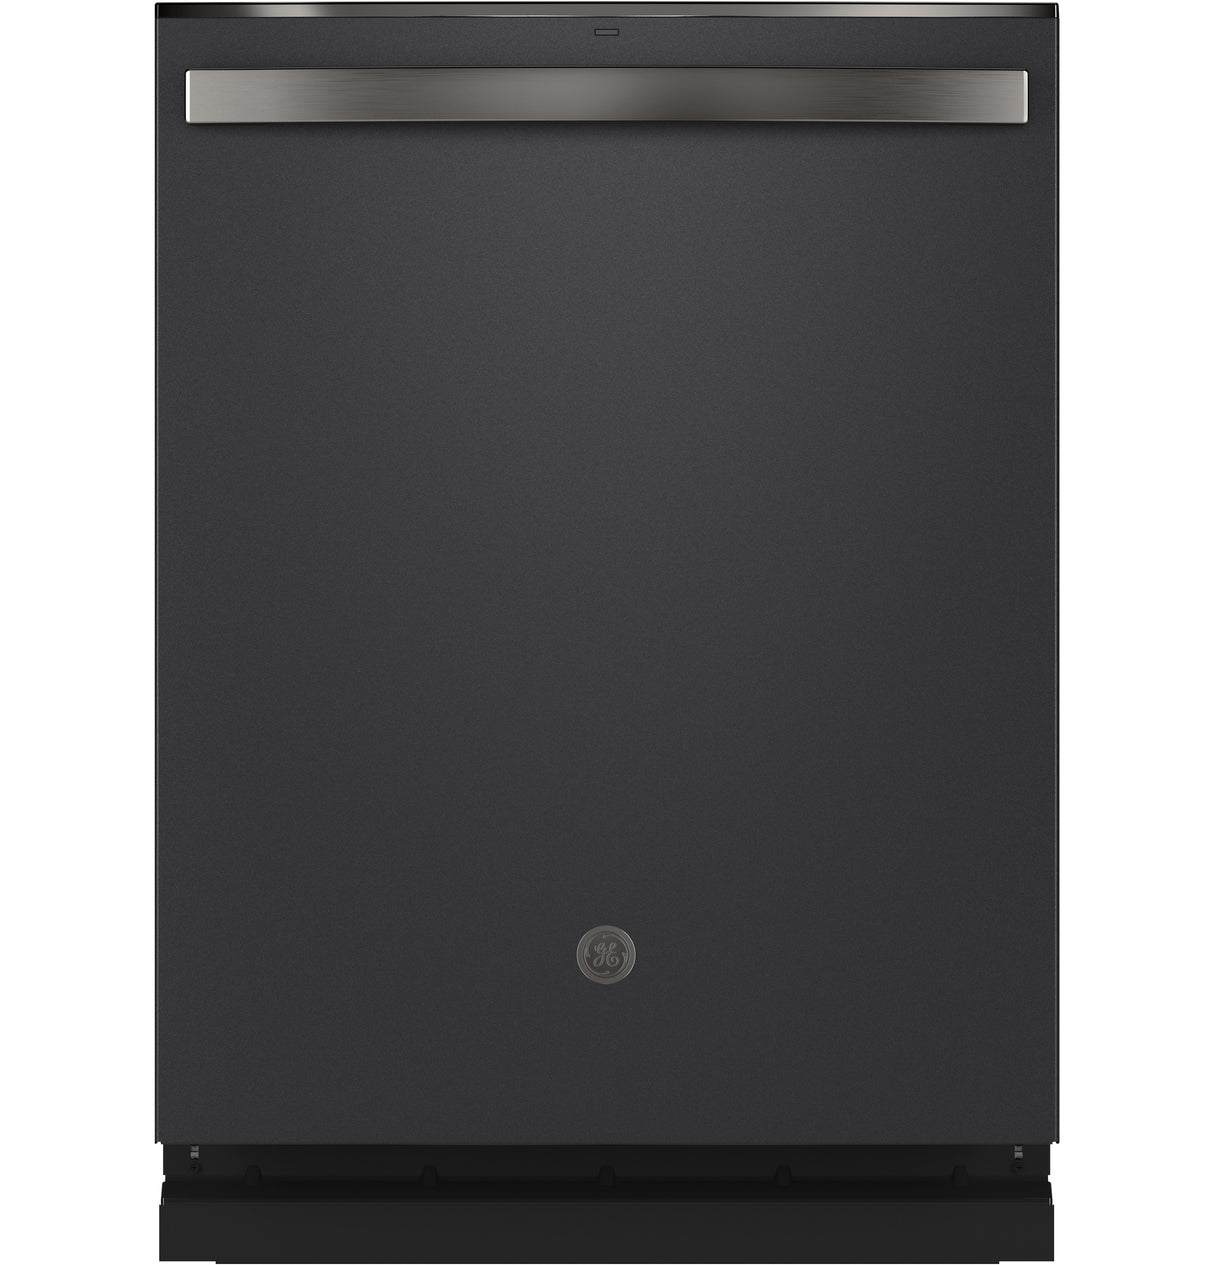 GE(R) ENERGY STAR(R) Top Control with Stainless Steel Interior Dishwasher with Sanitize Cycle & Dry Boost with Fan Assist - (GDT665SFNDS)